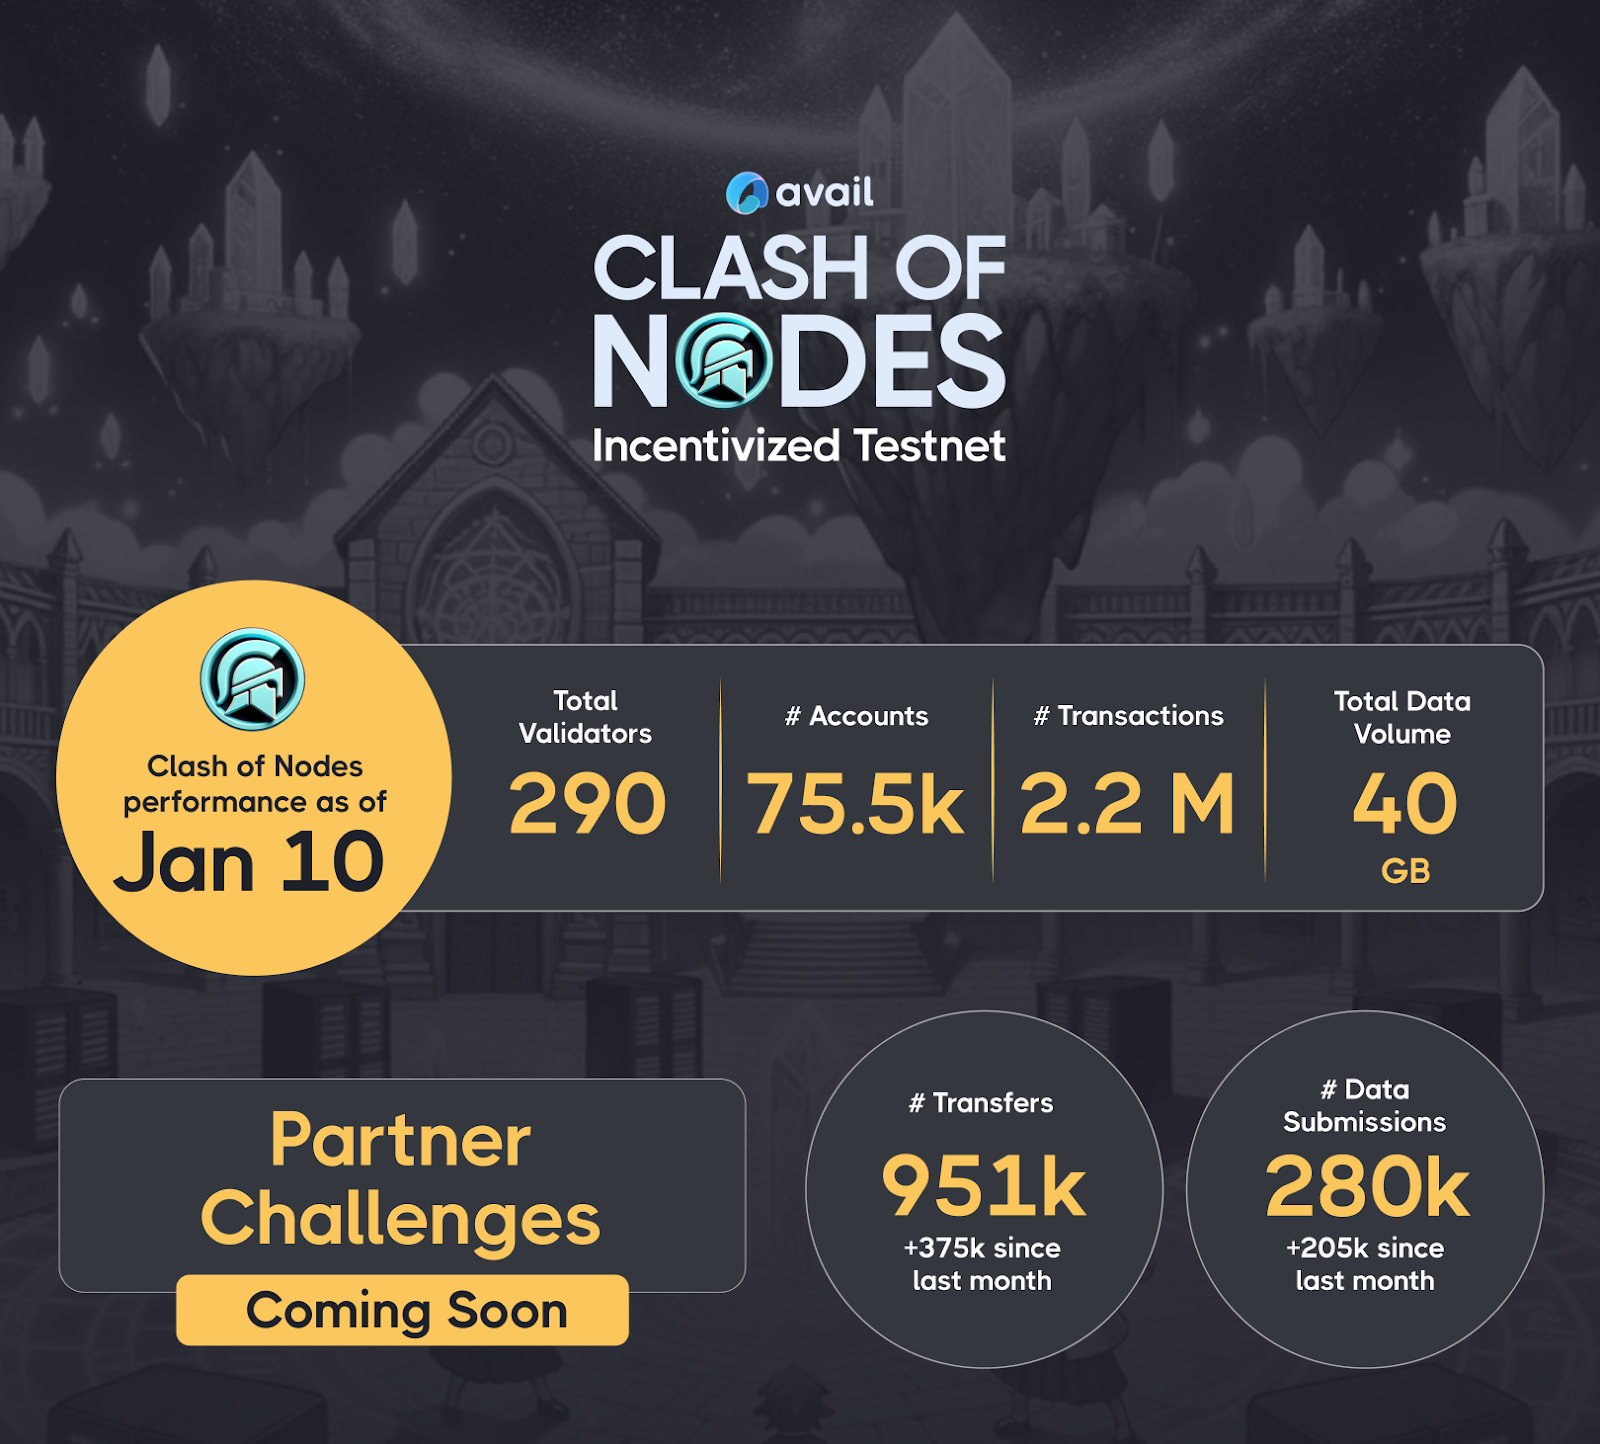 Learnings From the Clash of Nodes Incentivized Testnet